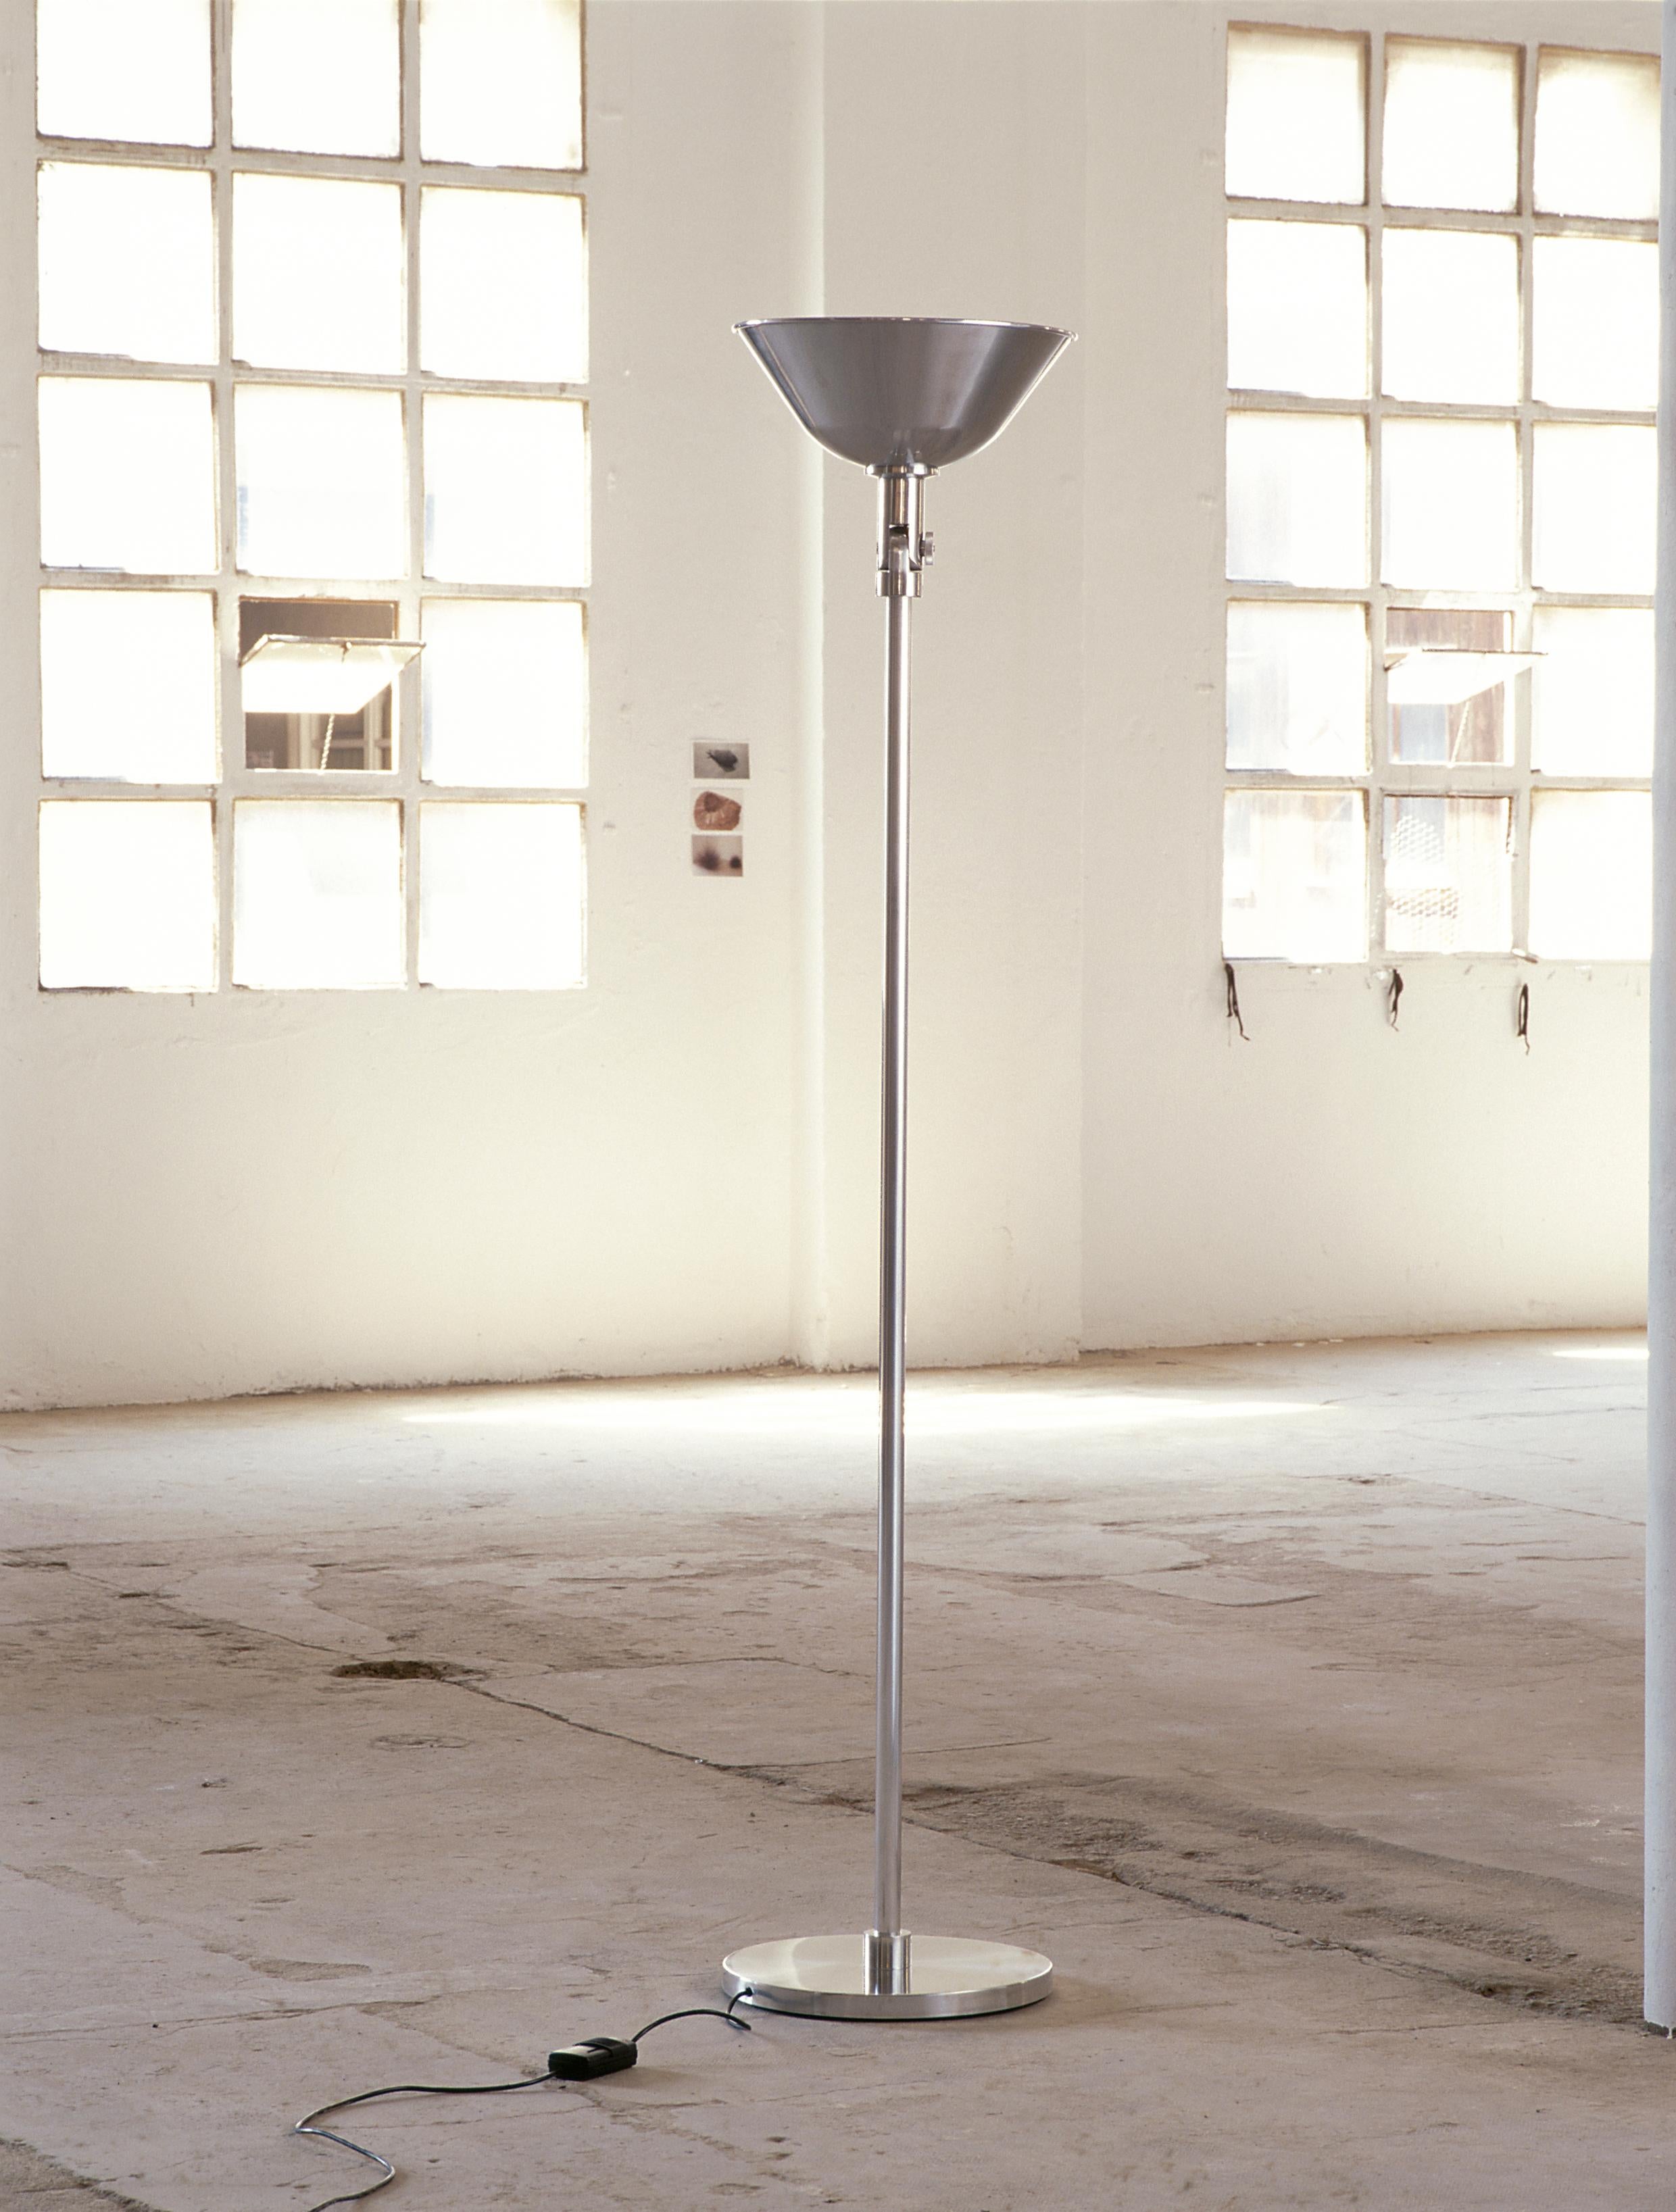 GATCPAC floor lamp by Josep Torres Clavé
Dimensions: D 41 x H 207 cm
Materials: Aluminum.

The GATCPAC lamp is a tribute to the group of Catalan architects of the same name who sought to modernise the approach to construction during their era.